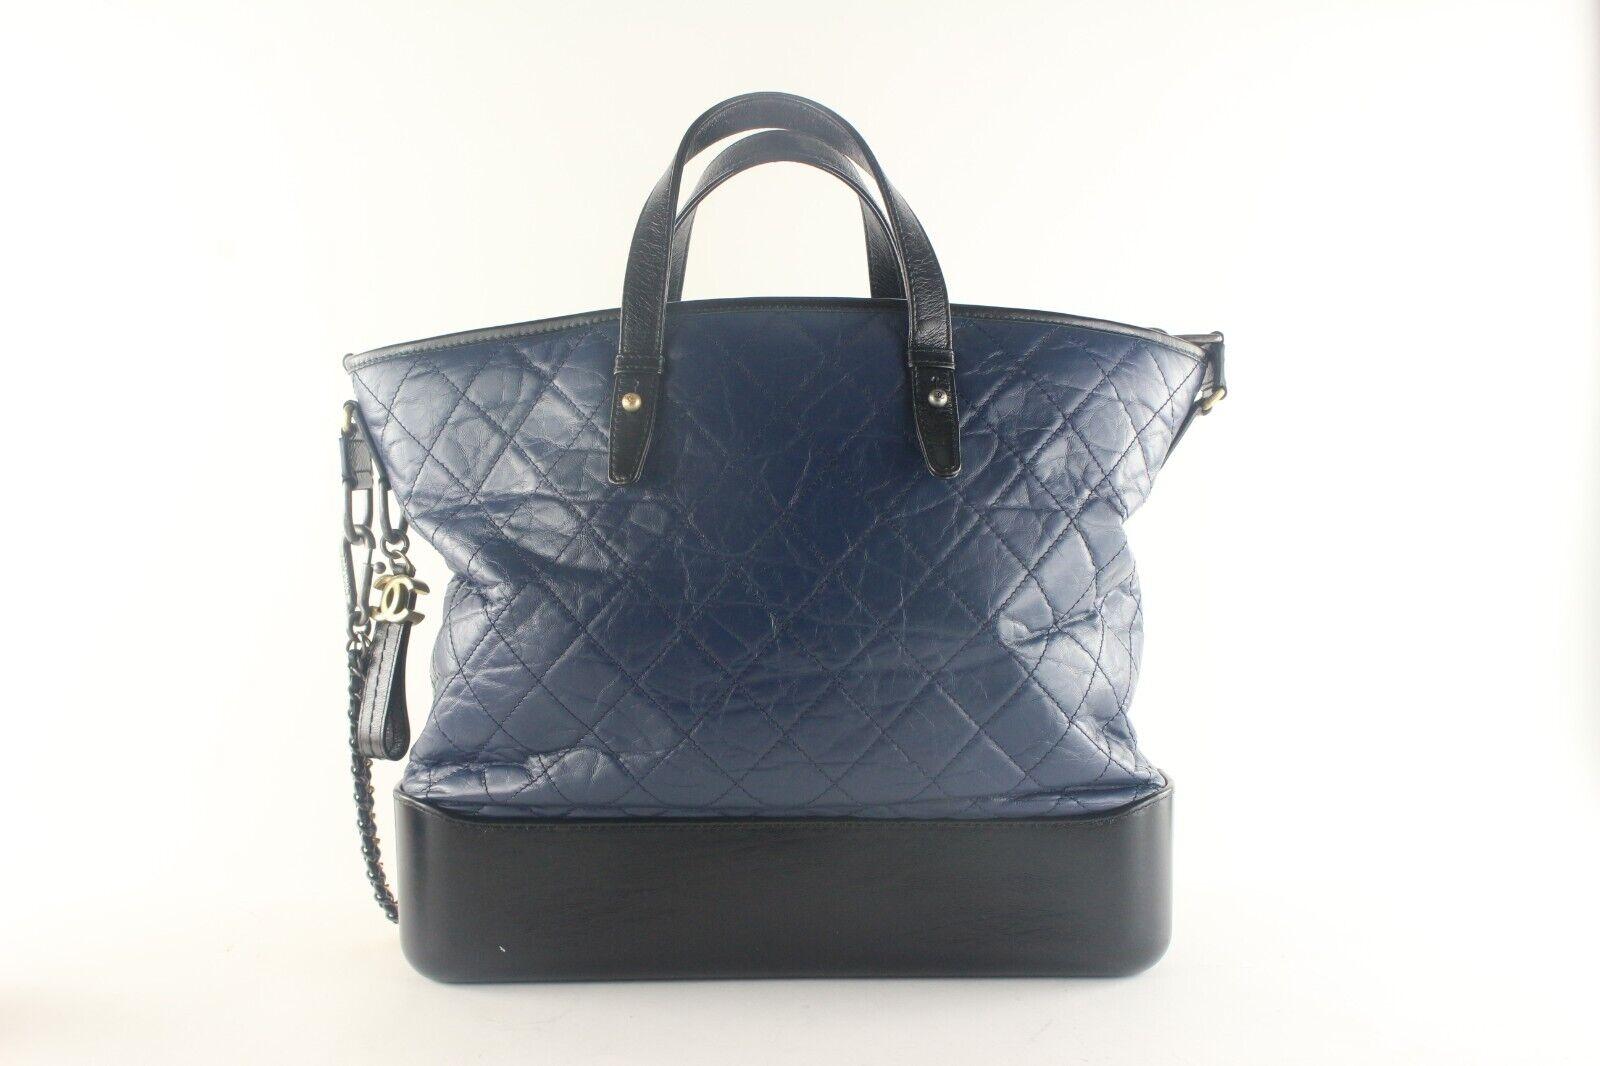 Chanel Two-Tone Quilted Black x Blue Leather Gabrielle 2way Tote 6CK103K In Good Condition For Sale In Dix hills, NY